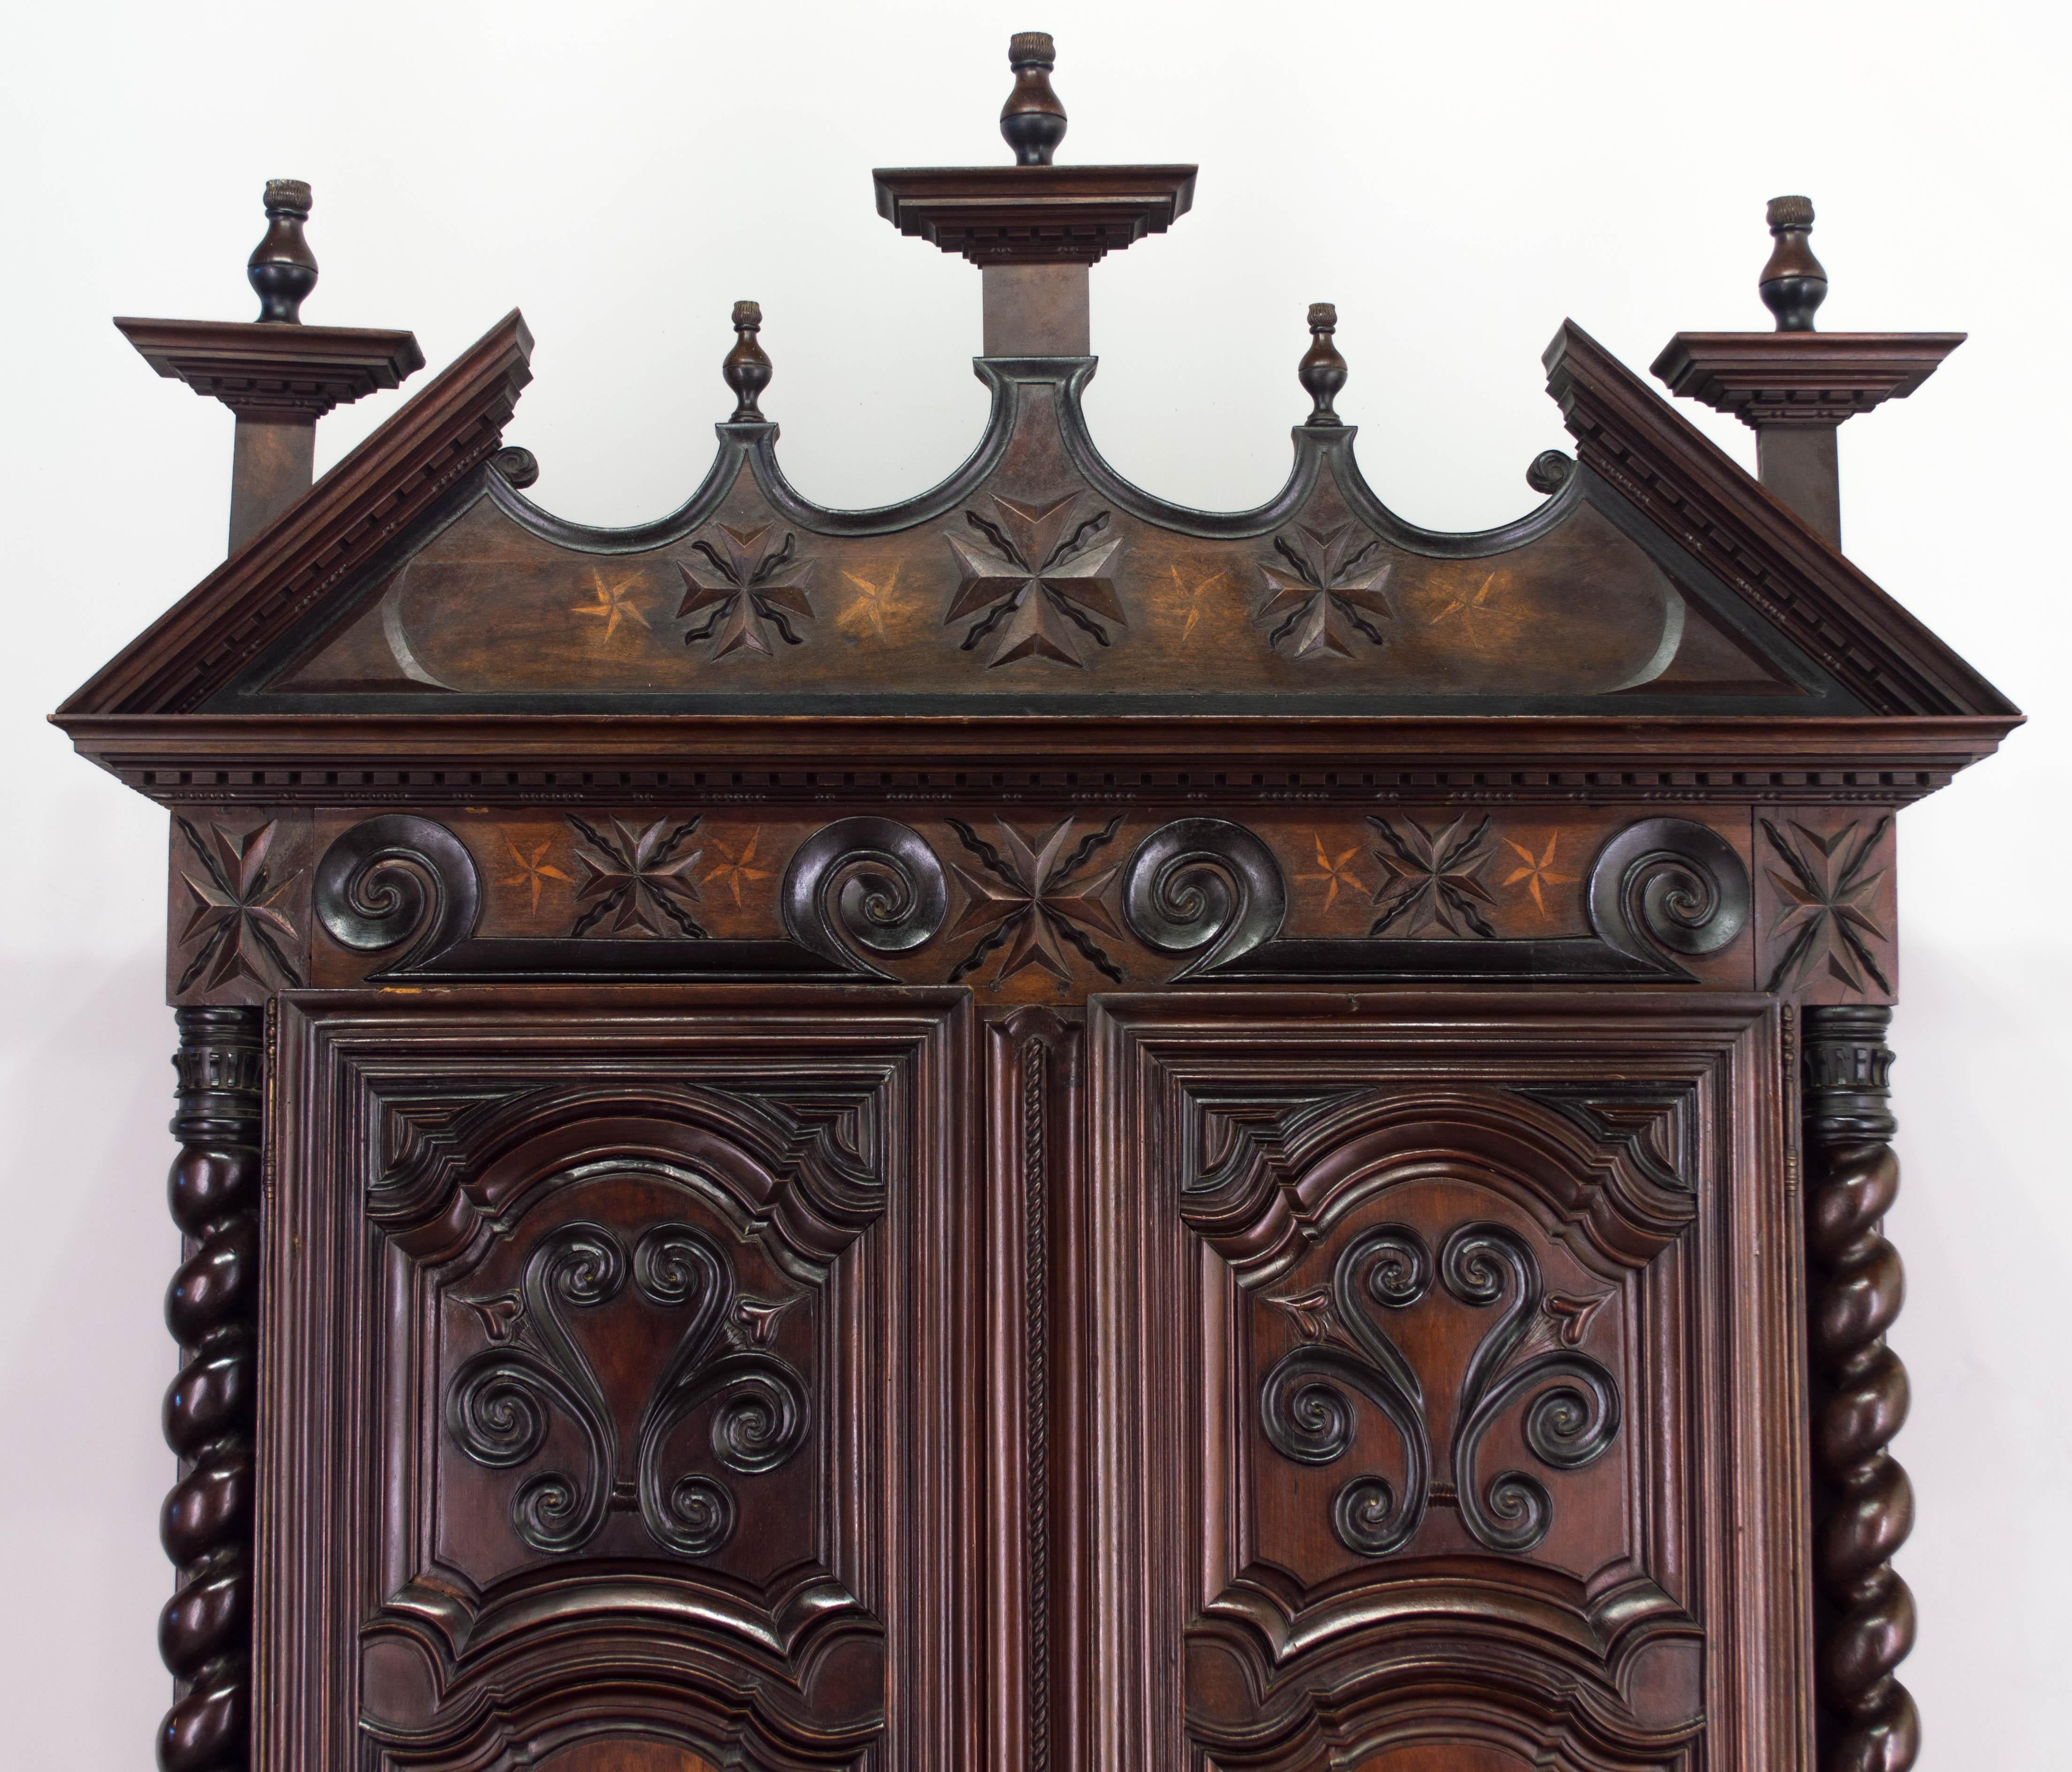 An exceptional Louis XIII style armoire from a chateau in the Southwest of France near the town of Agen. Made of various woods including ebony, lemon and walnut. Magnificent hand-turned twisted columns. Raised panel doors with inlaid details.